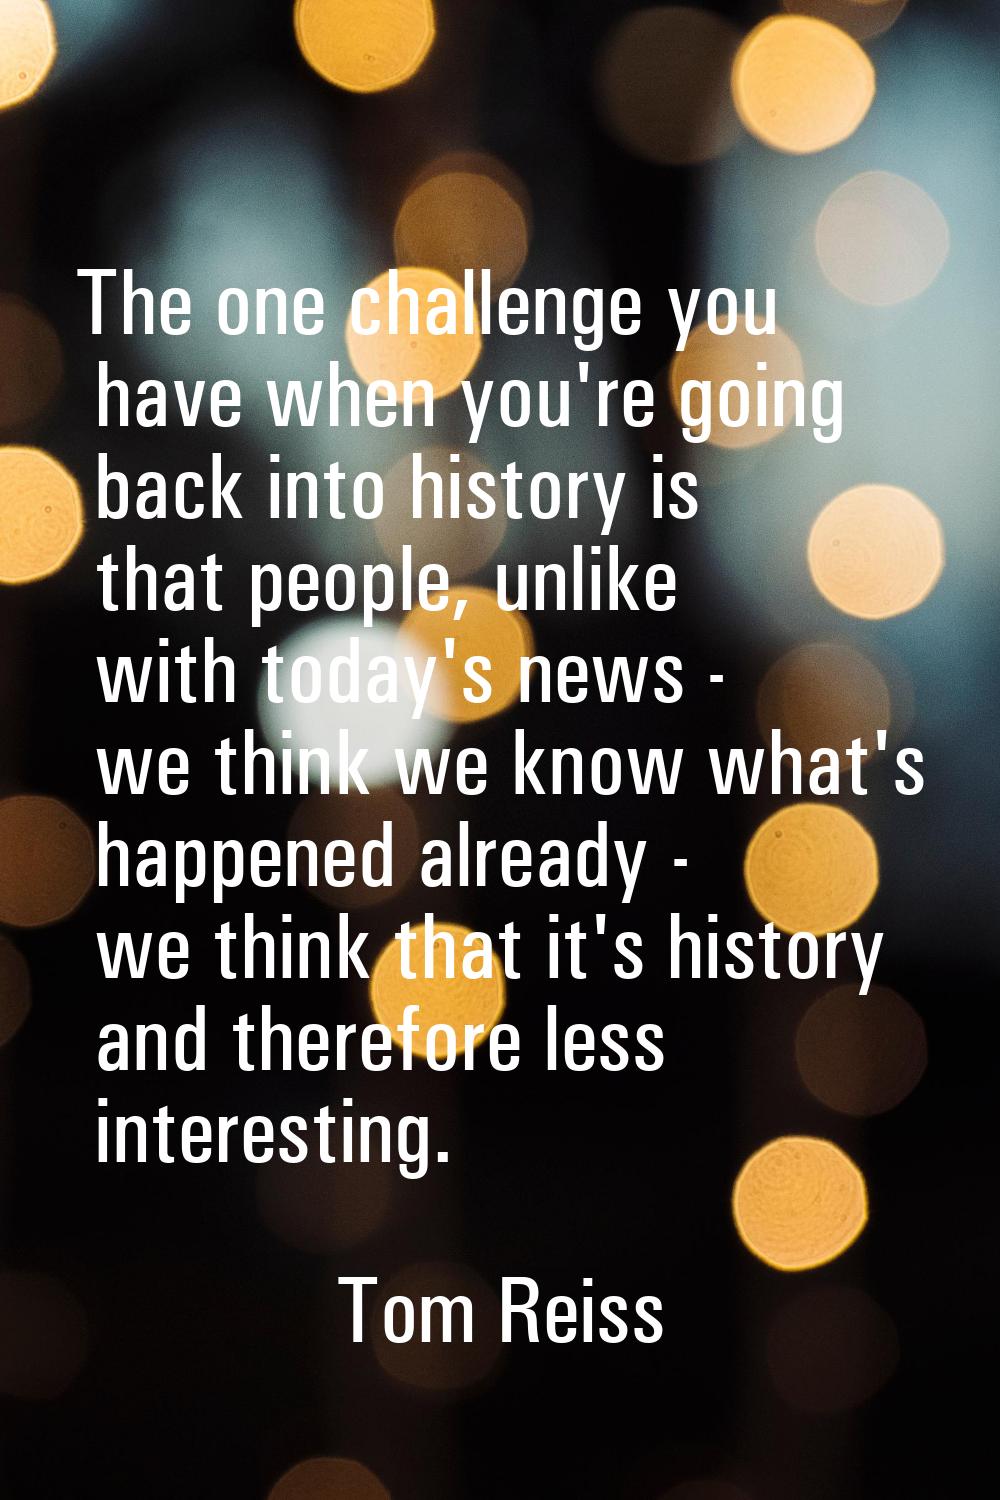 The one challenge you have when you're going back into history is that people, unlike with today's 